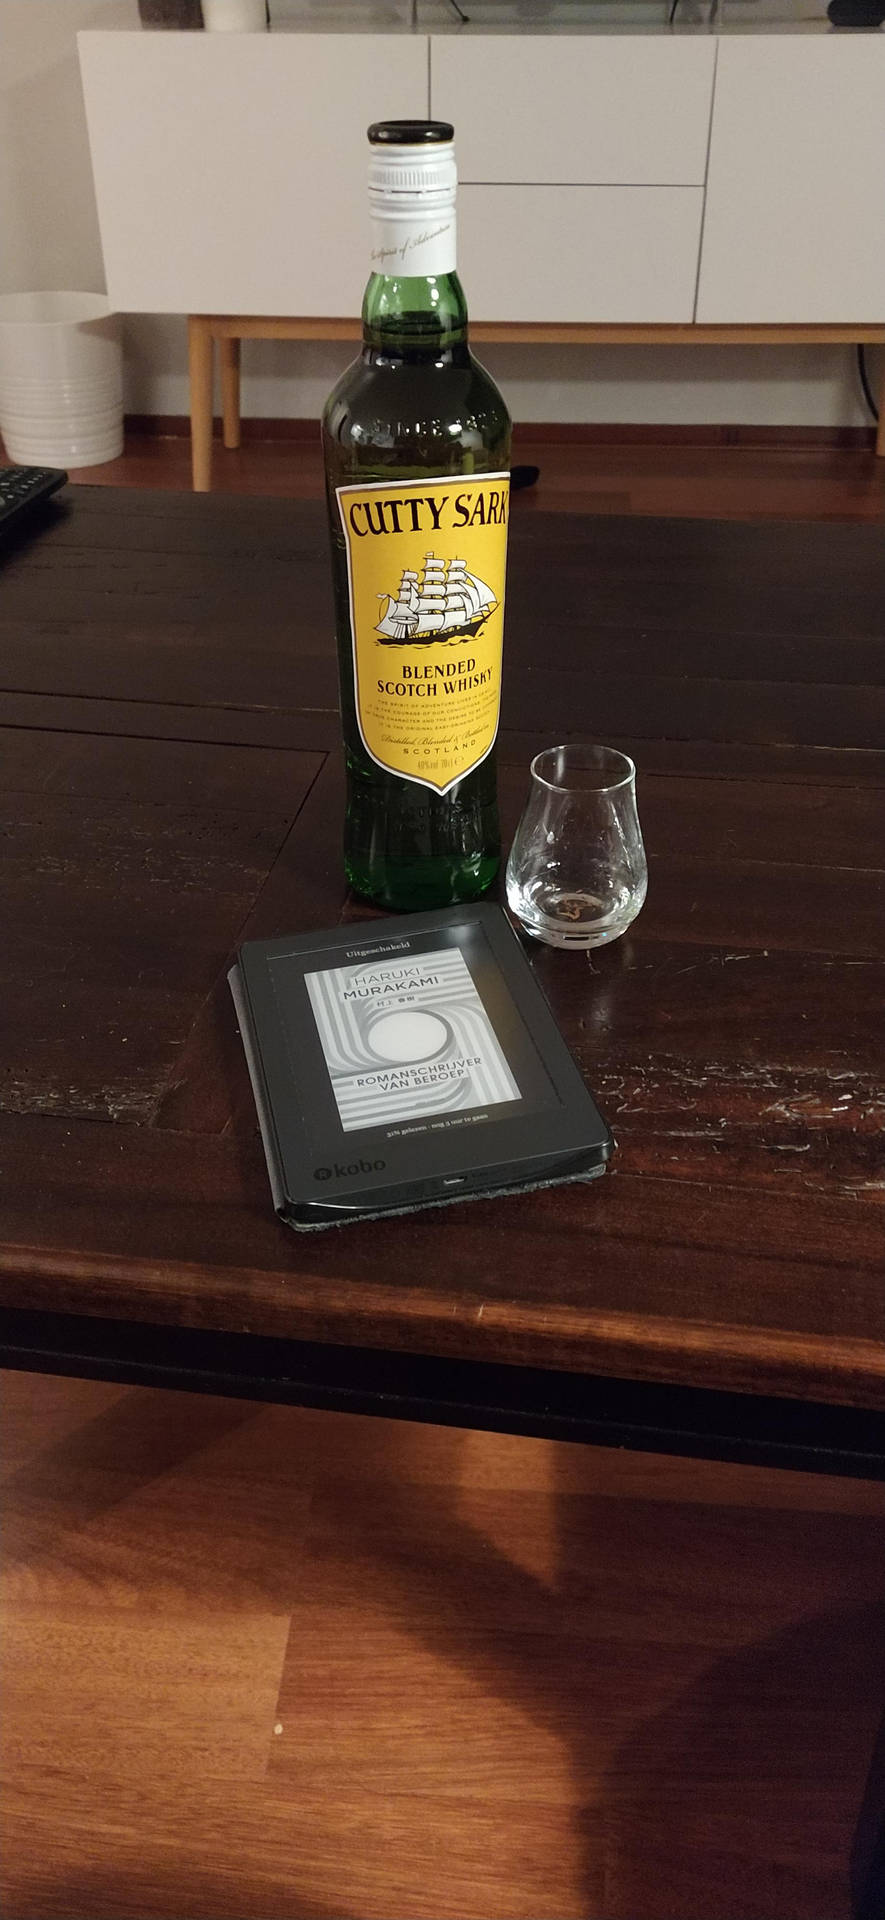 Cutty Sark Drink With A Kobo Ereader Wallpaper